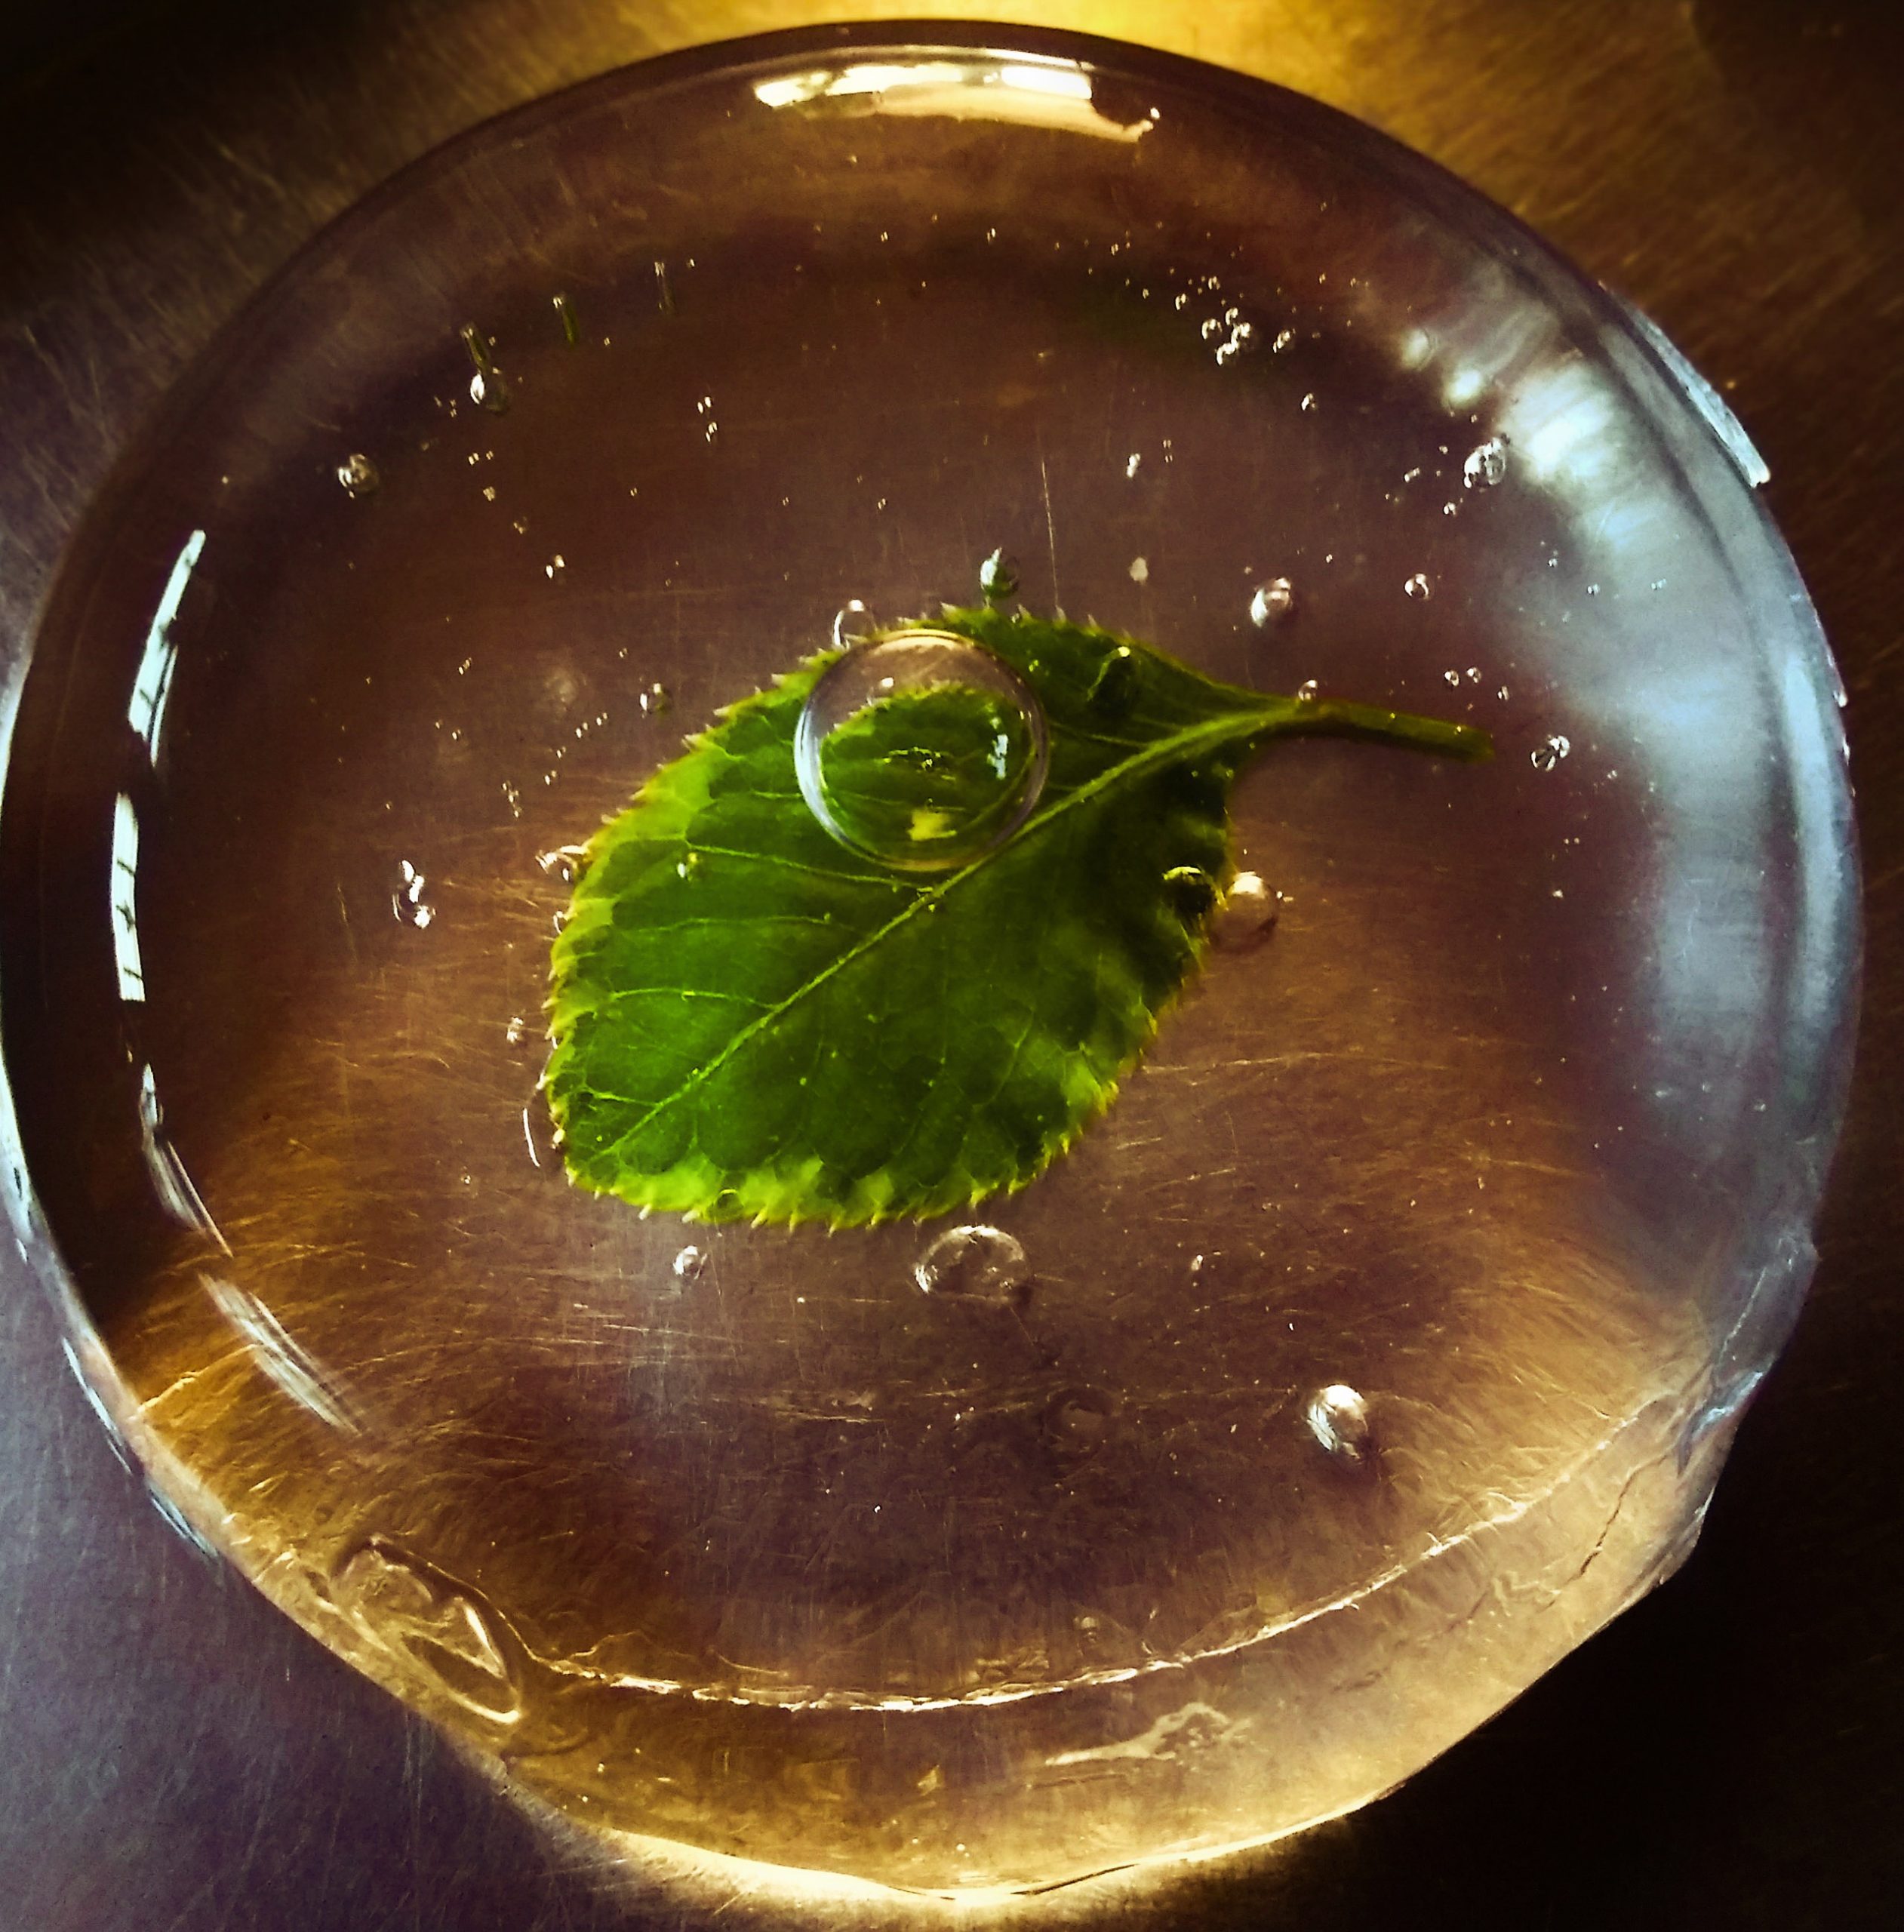 A leaf in water